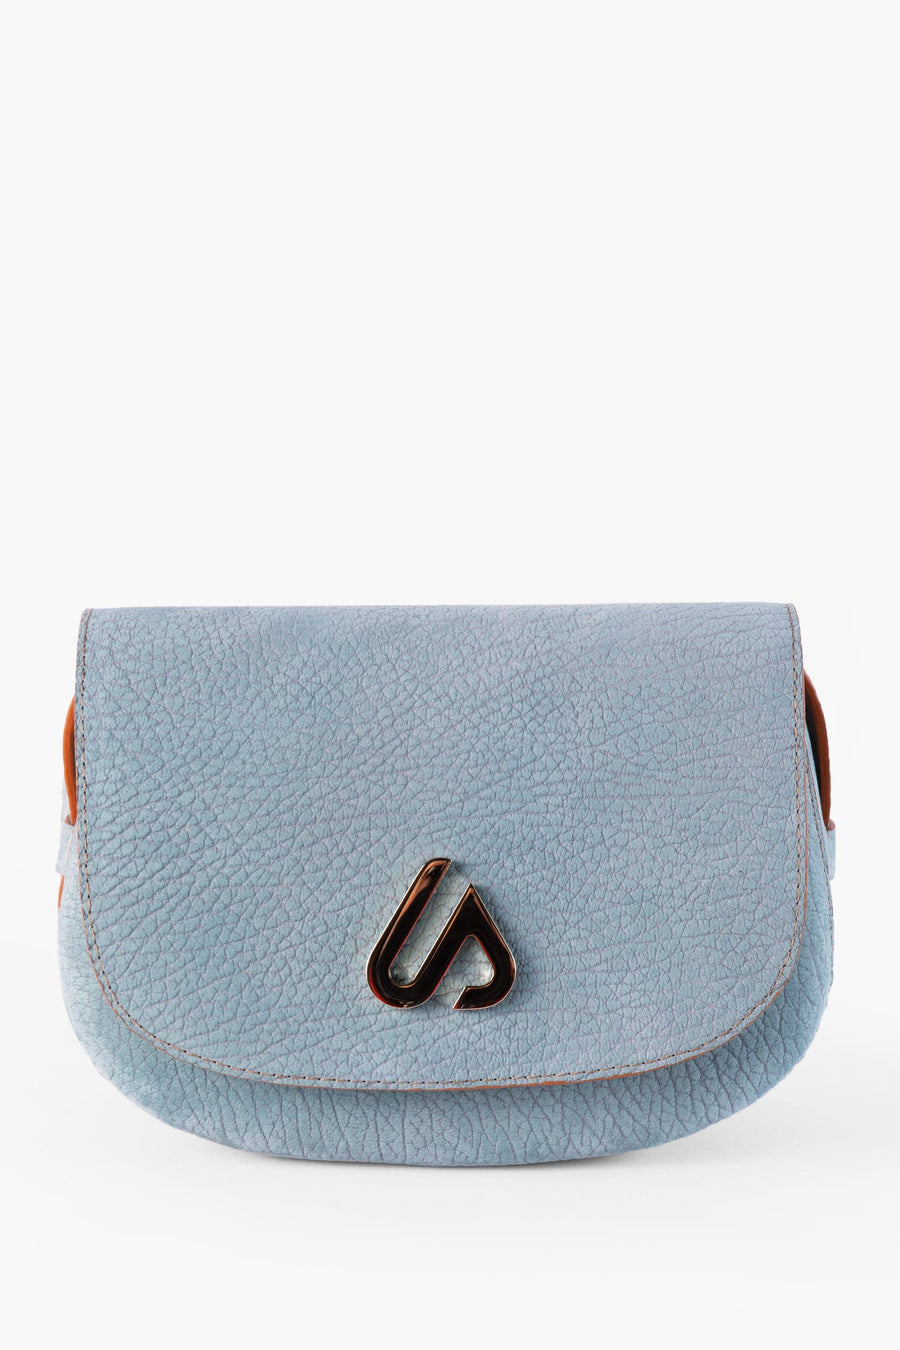 Sustainable bag TISA col. light blue made from vegetable tanned leather. Made in Germany locally produced in Hamburg by Alina Schürfeld.